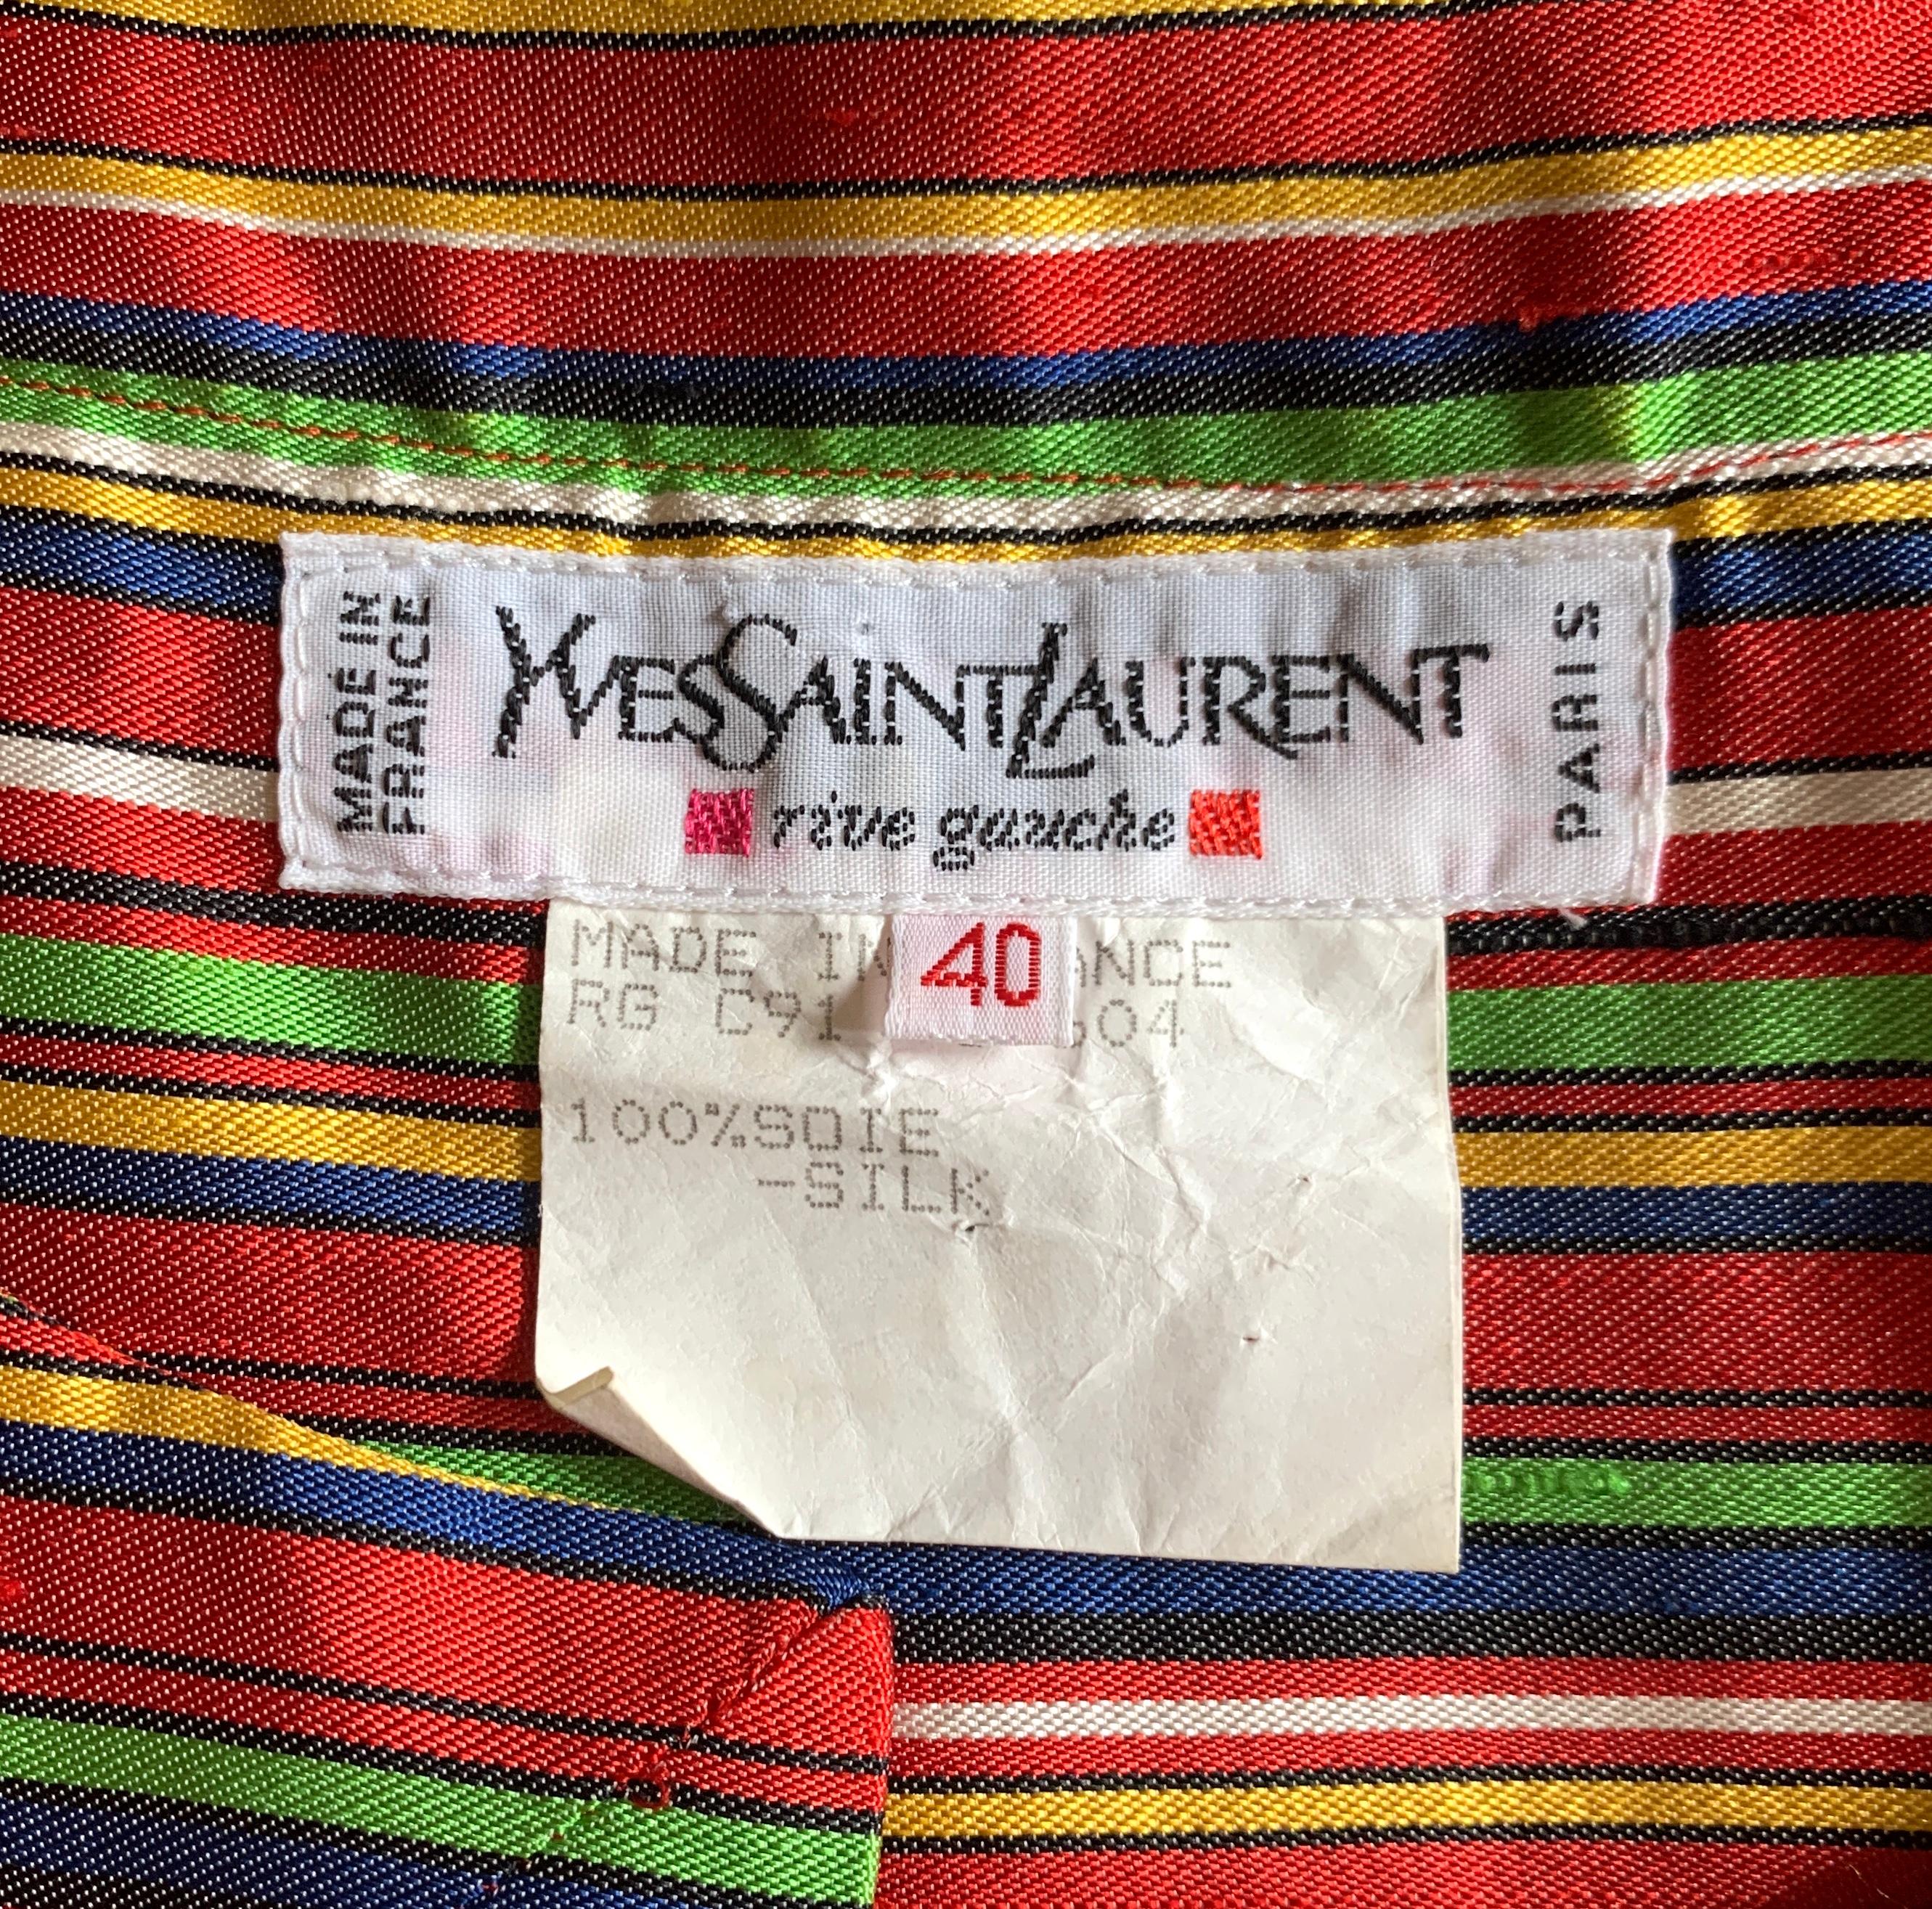 Yves Saint Laurent 1990s Silk Jacket in Red, Green, Blue and Yellow Stripe For Sale 2